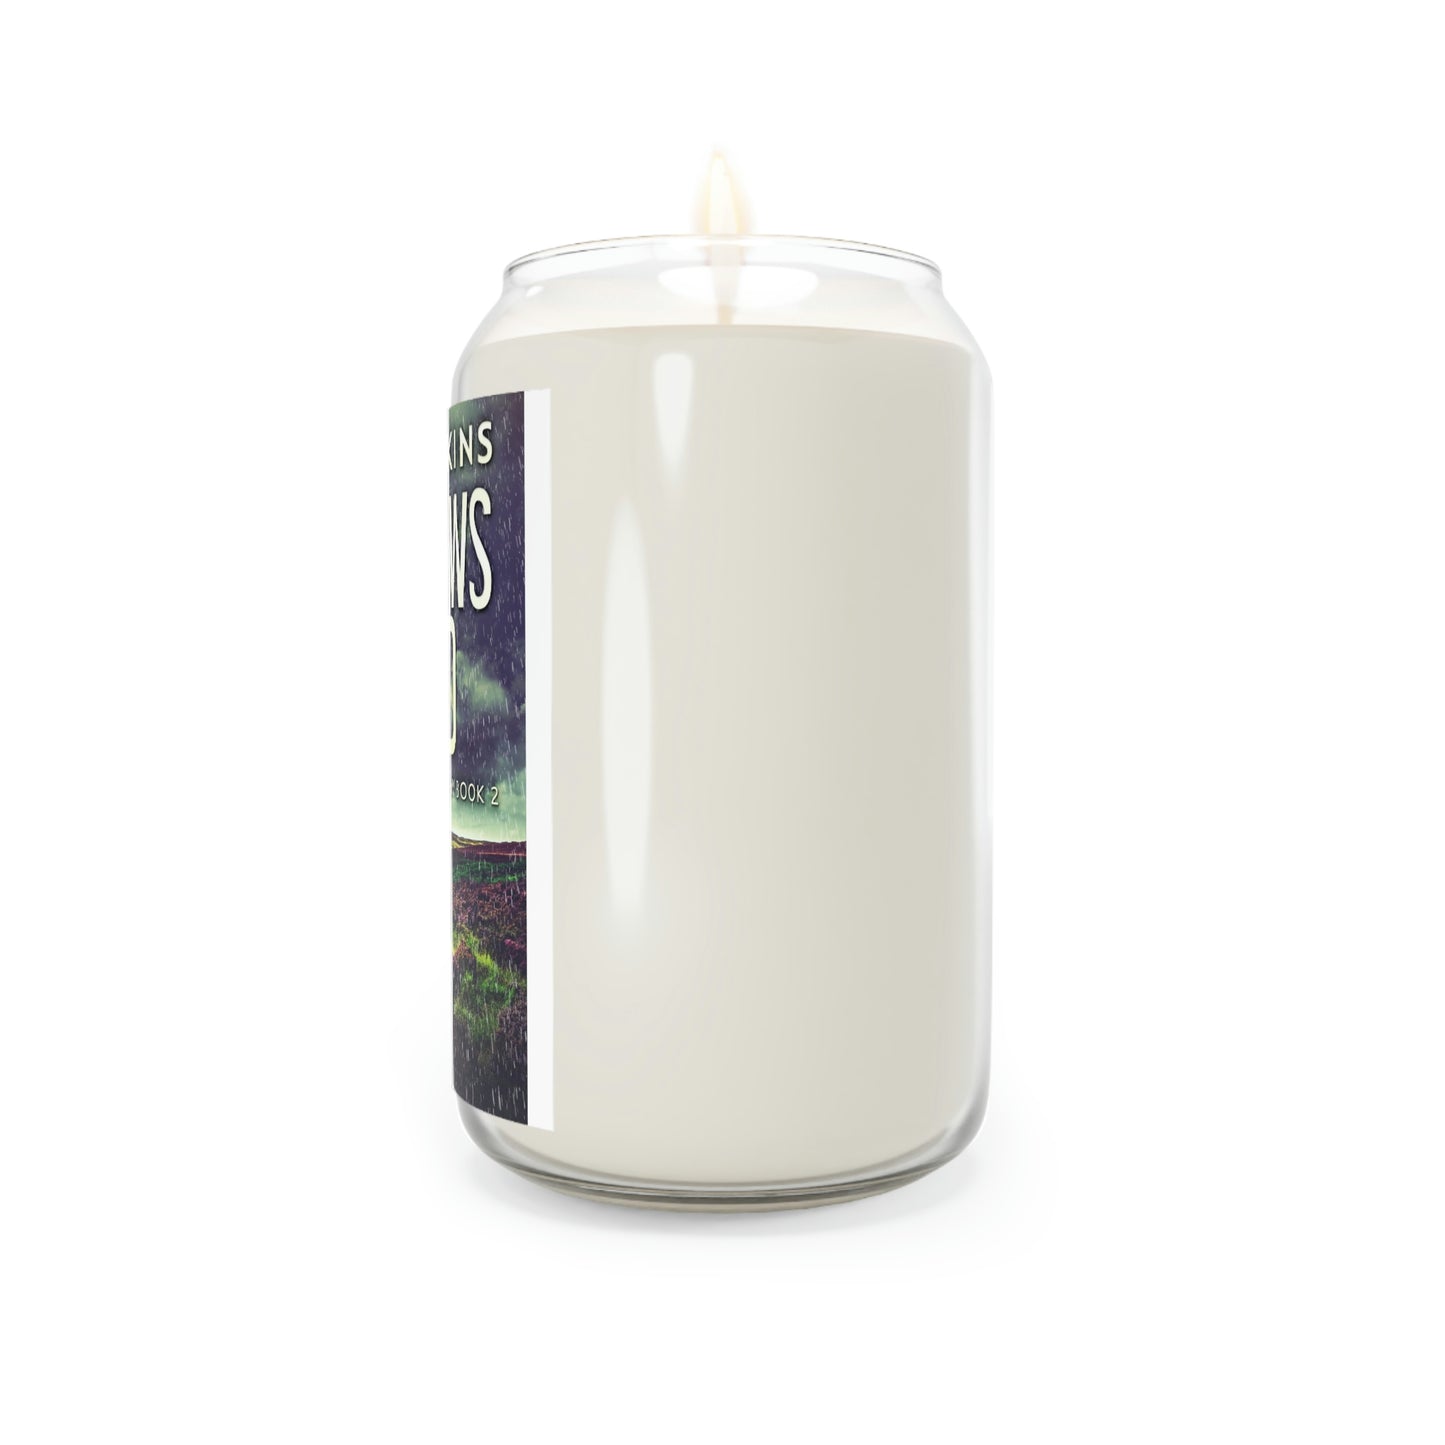 Gallows End - Scented Candle